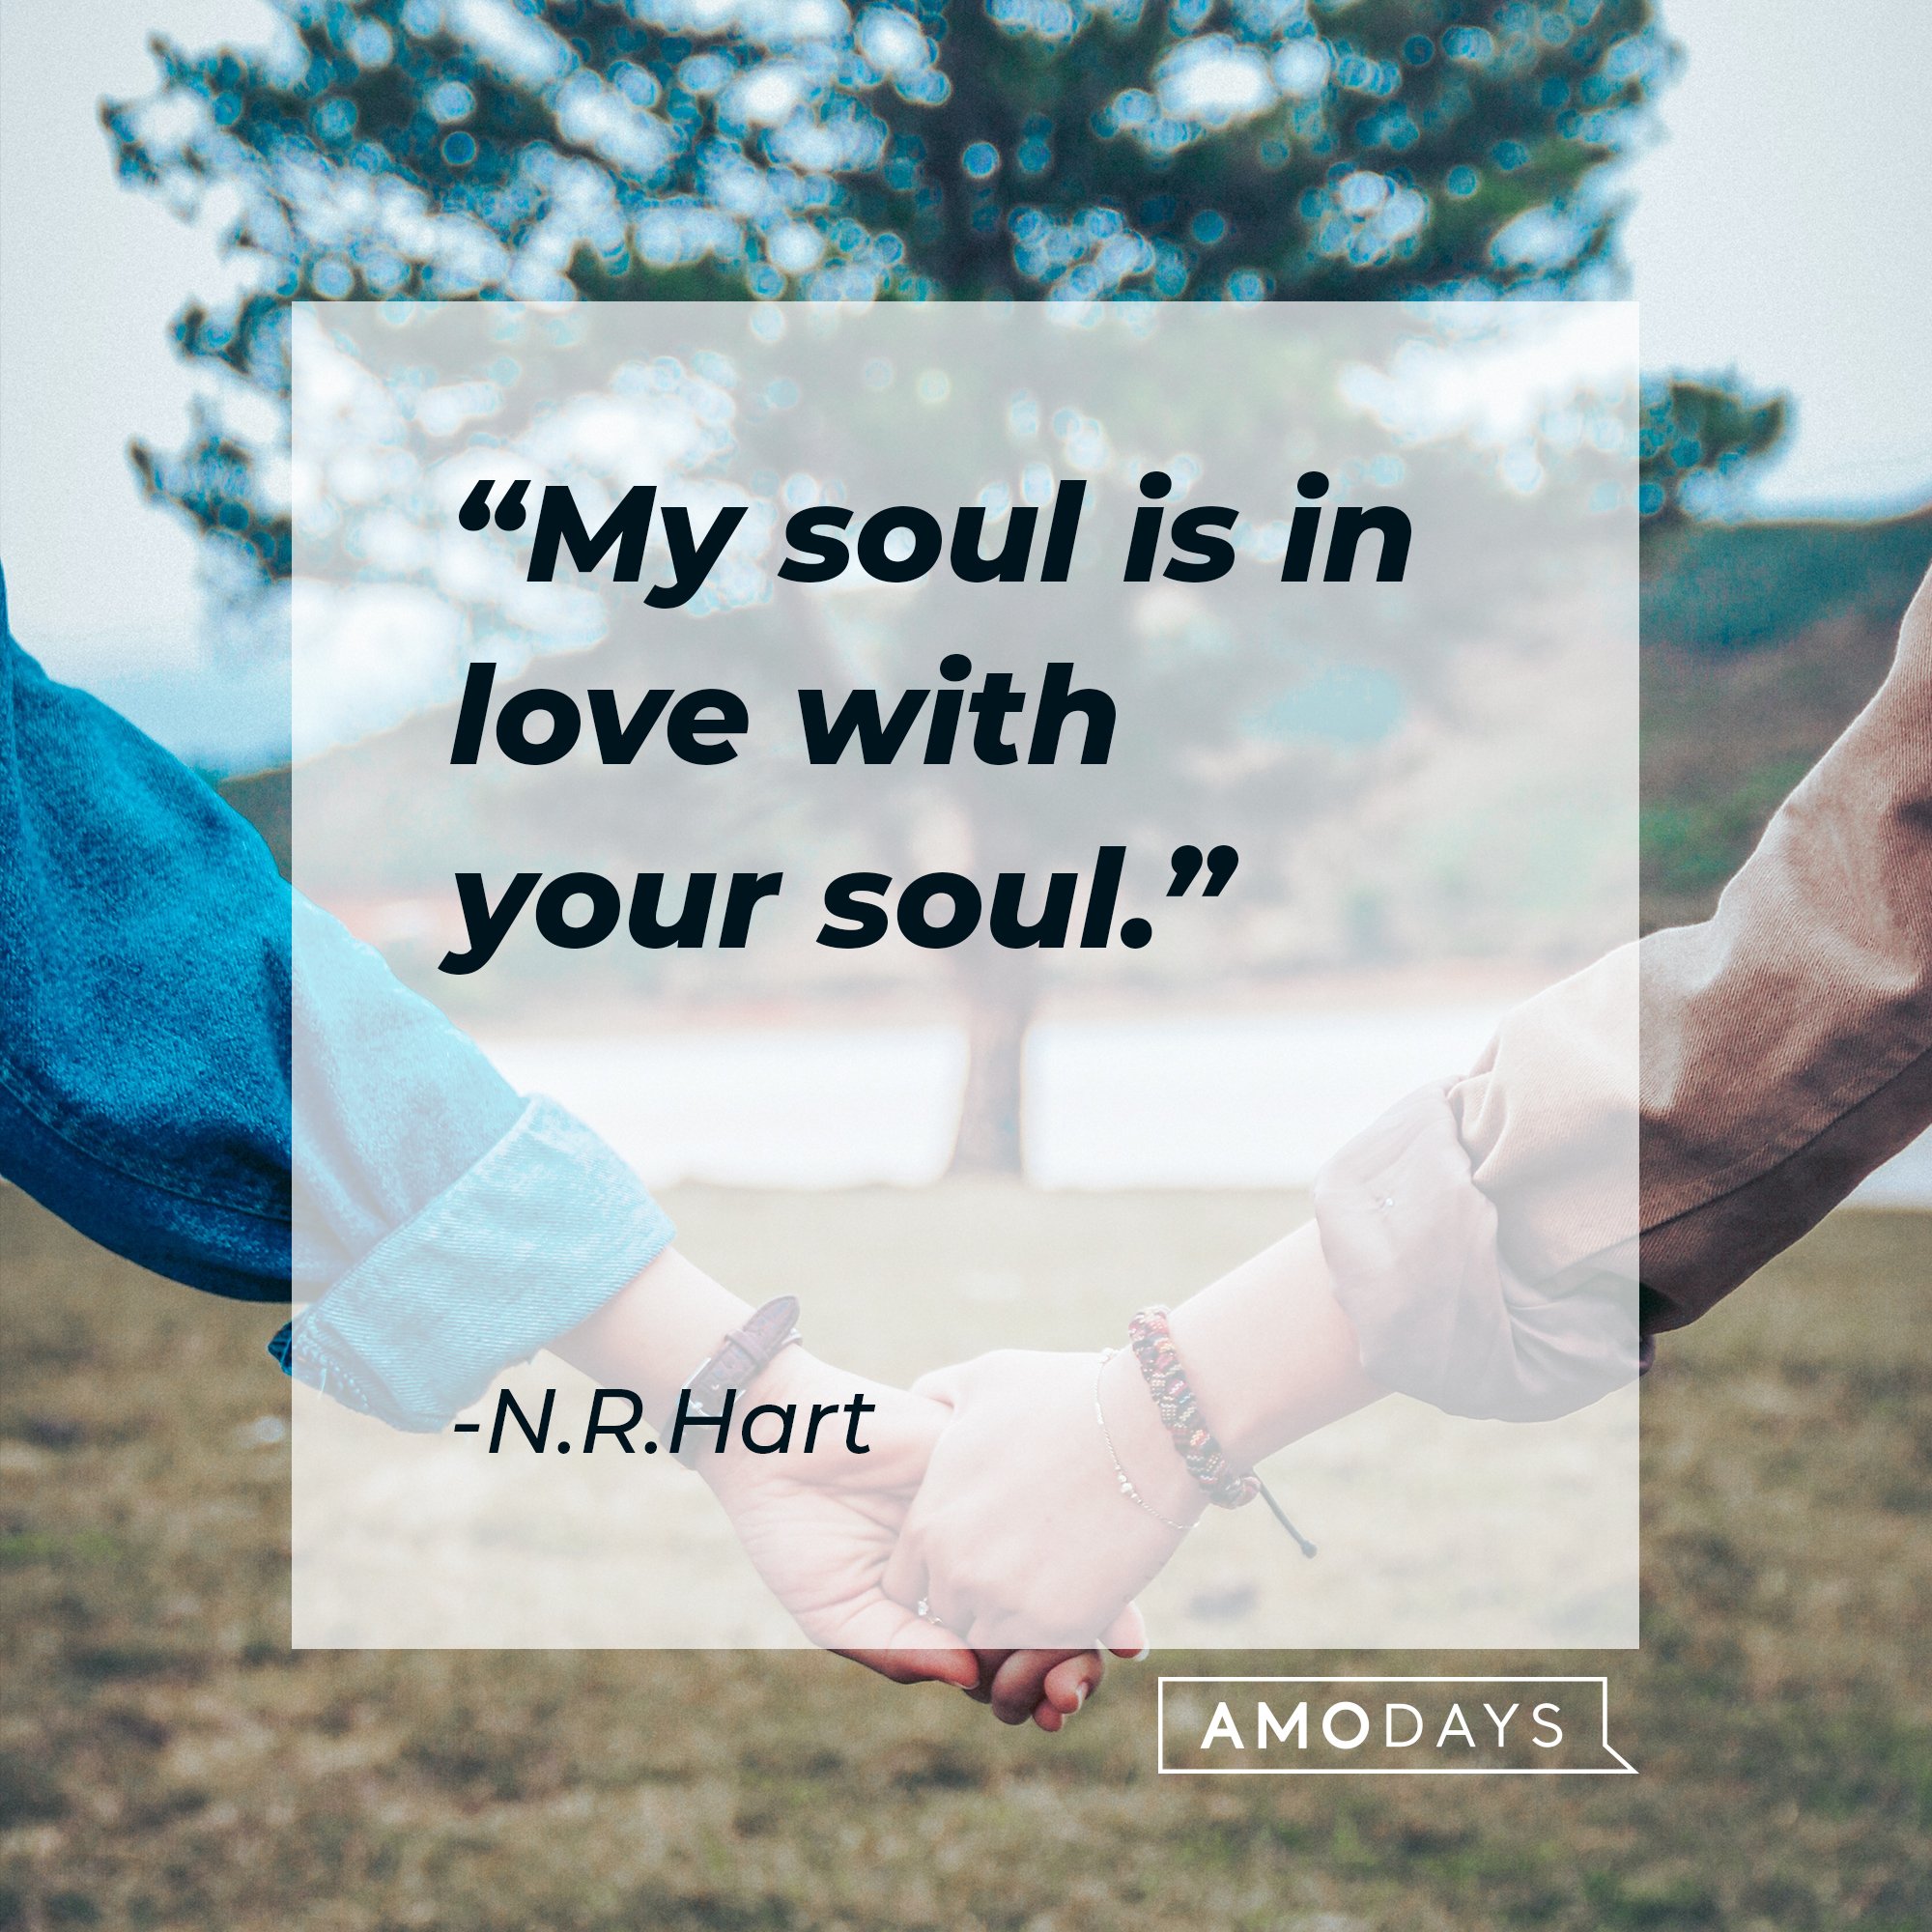 N.R.Hart’s quote: "My soul is in love with your soul." | Image: AmoDays